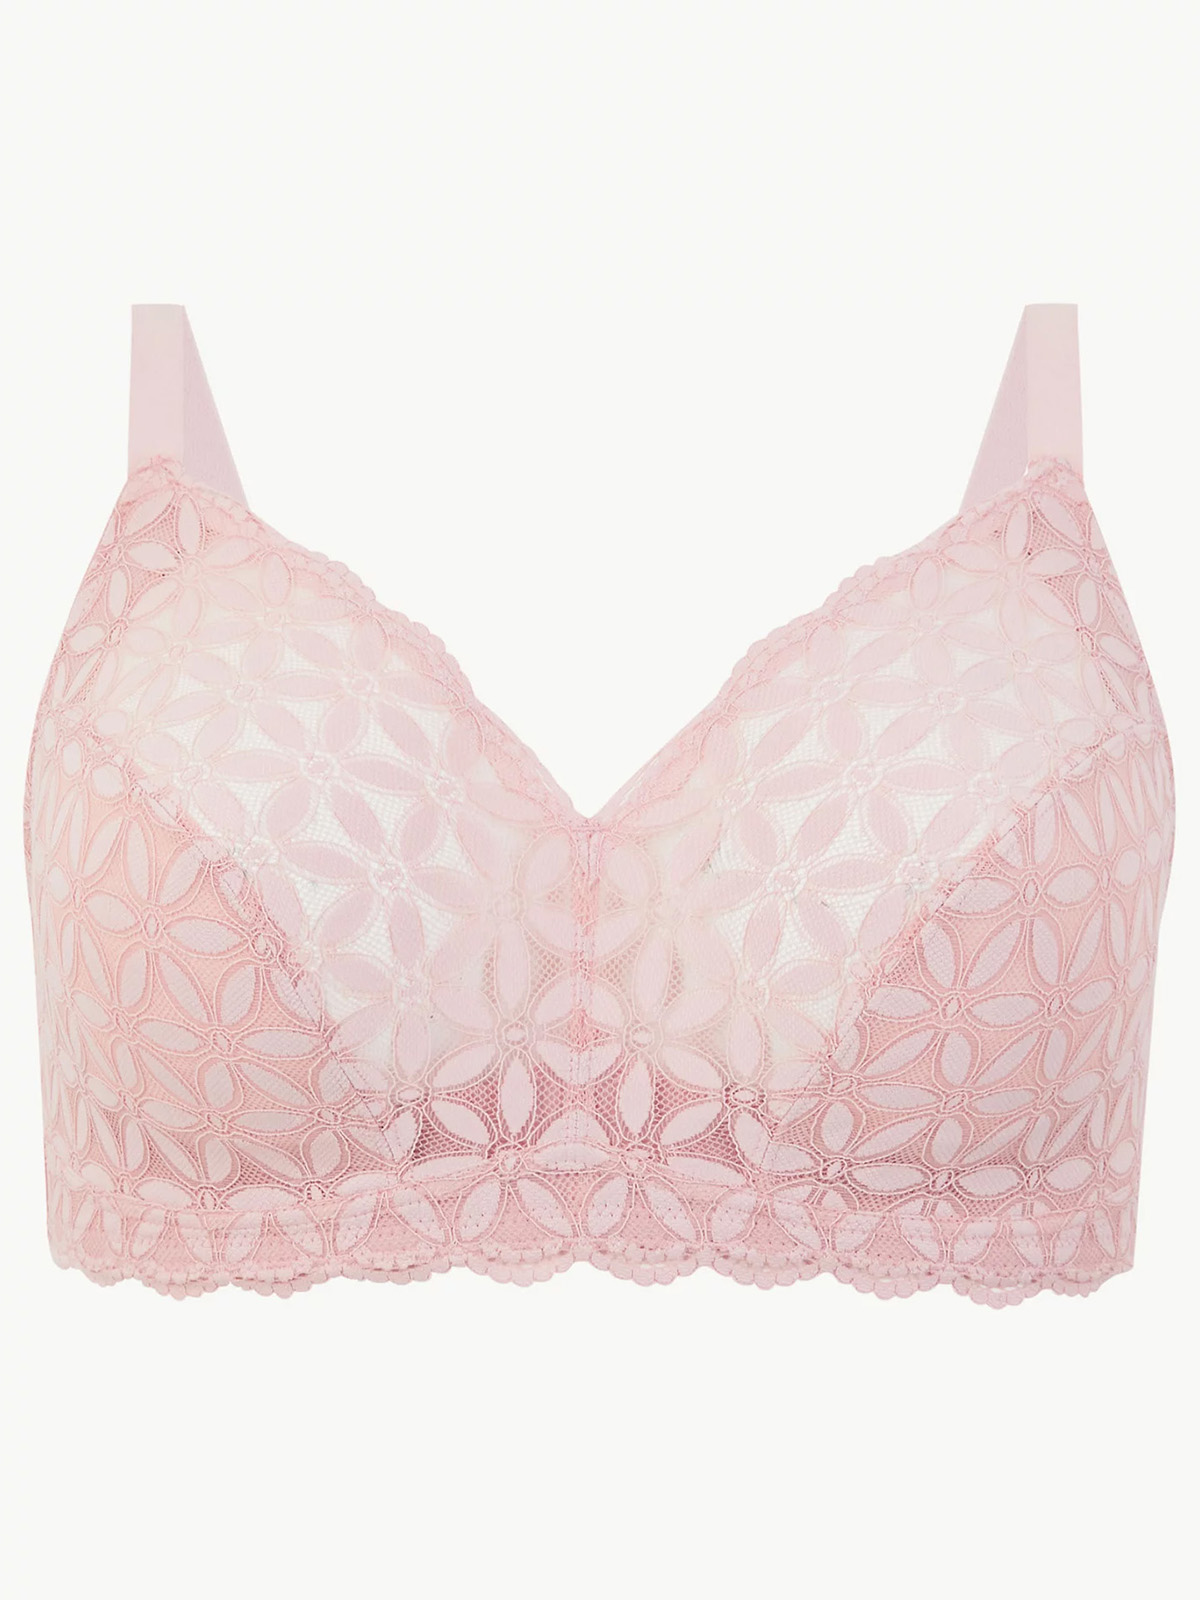 Marks And Spencer Mand5 Medium Pink Floral Lace Full Cup Bralette Size 32 To 34 Dd E F G Gg 